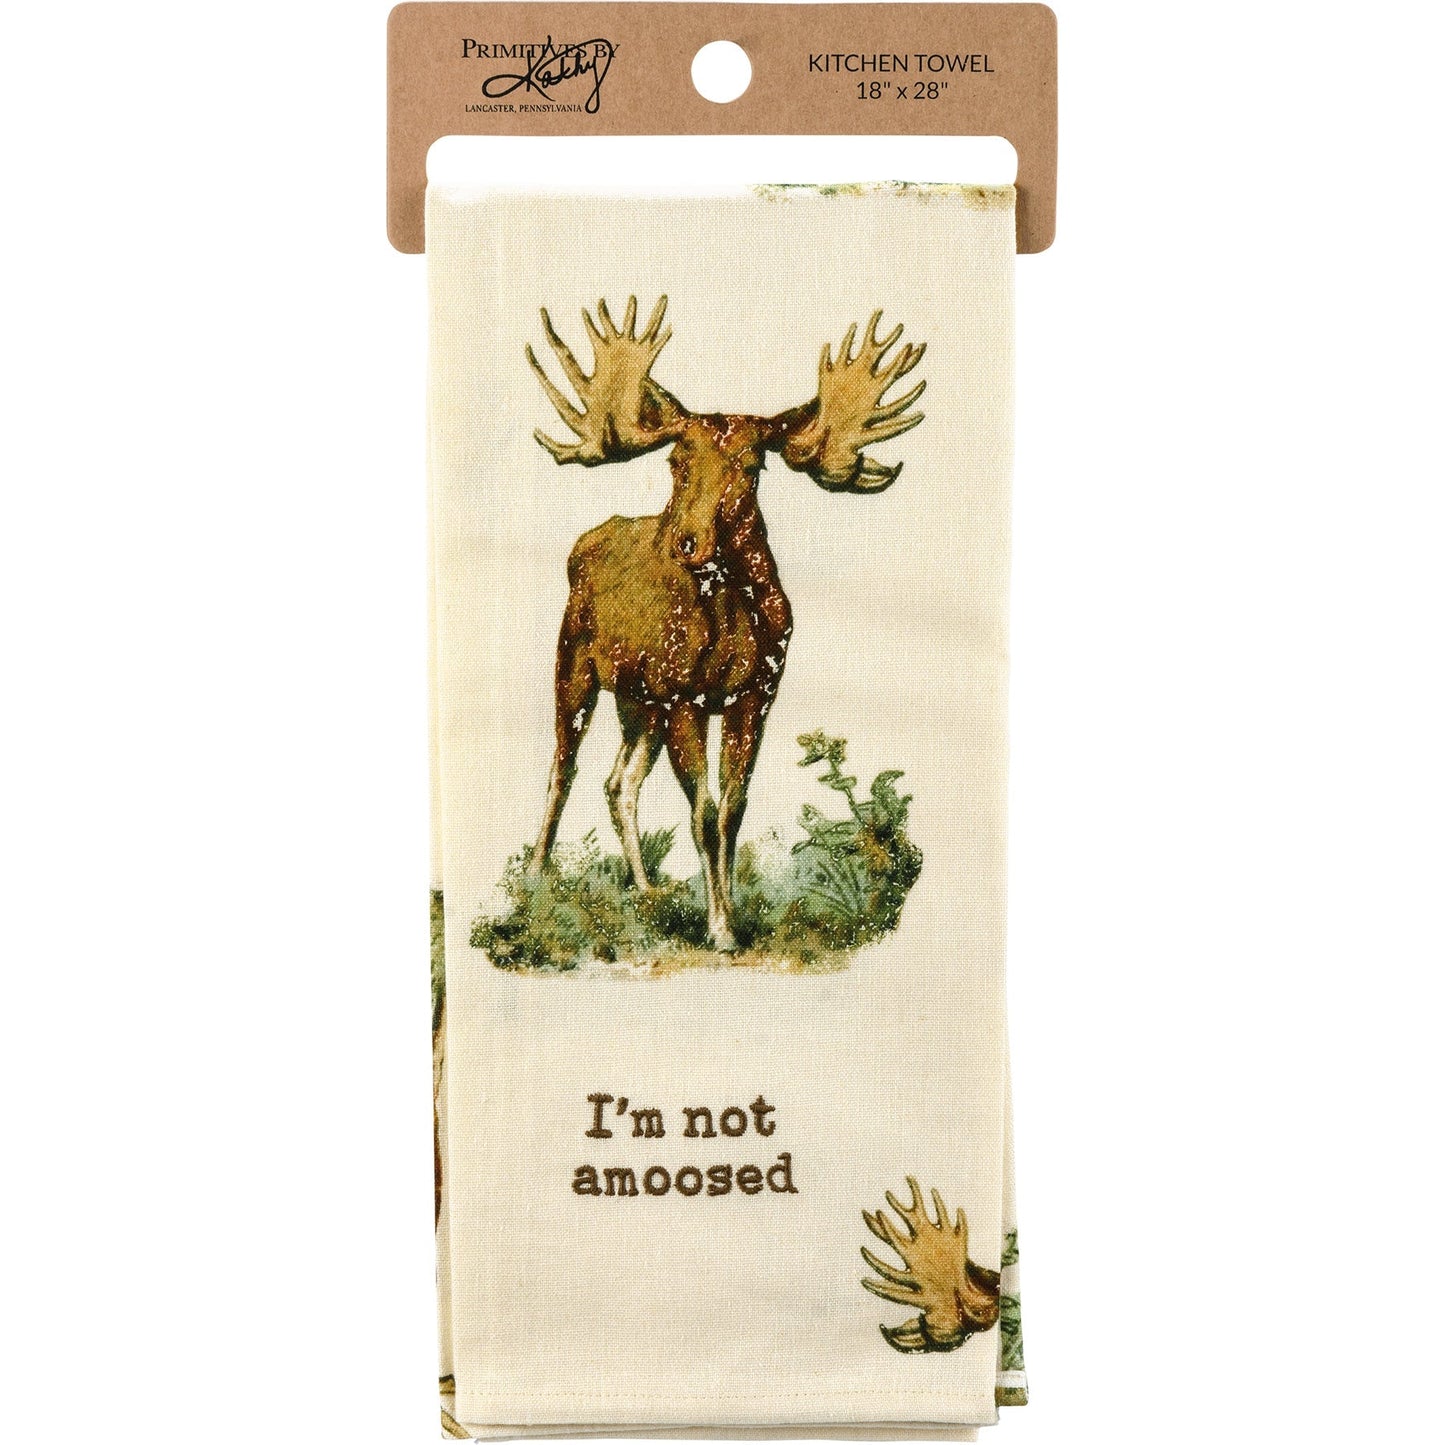 I'm Not Amoosed Moose Dish Cloth Towel | Cotten Linen Novelty Tea Towel | Embroidered Text | 18" x 28"